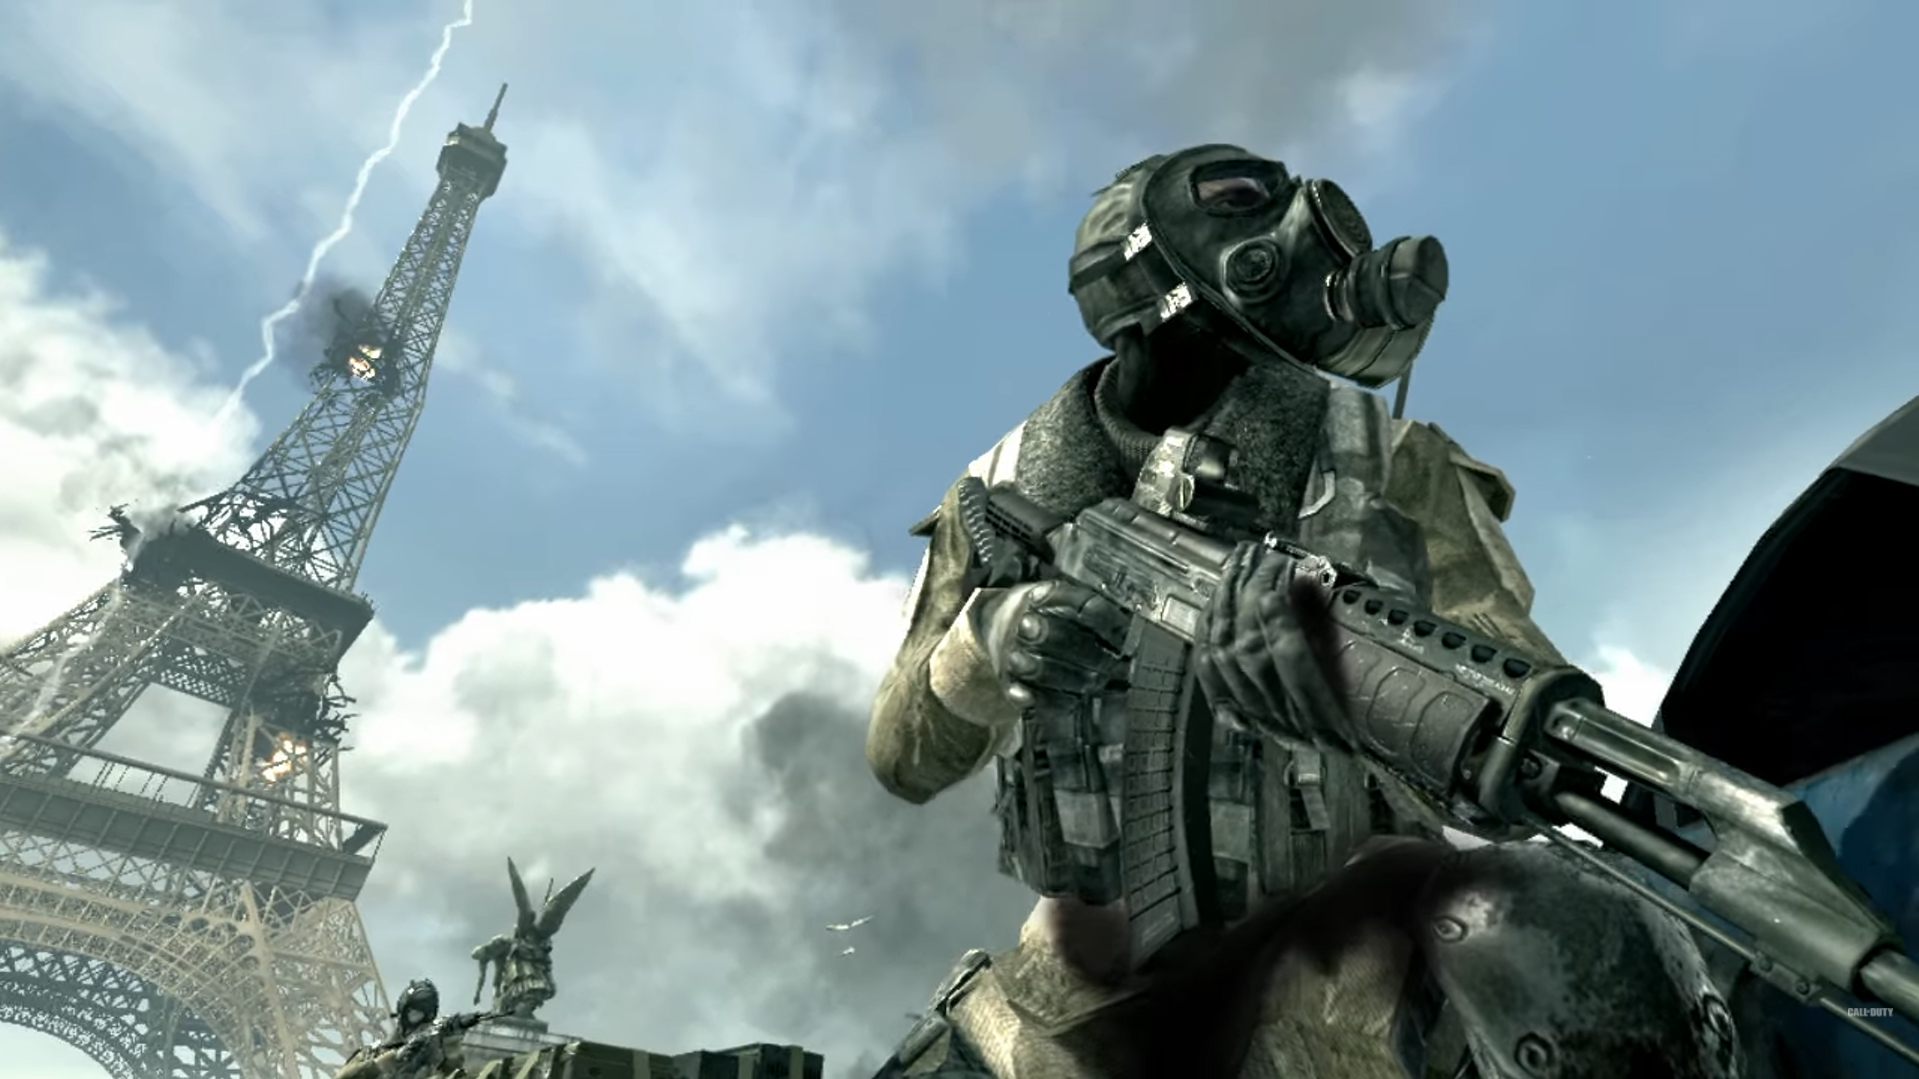 Rumored Call of Duty: Modern Warfare 3 Remaster Doesn't Exist, Activision Says